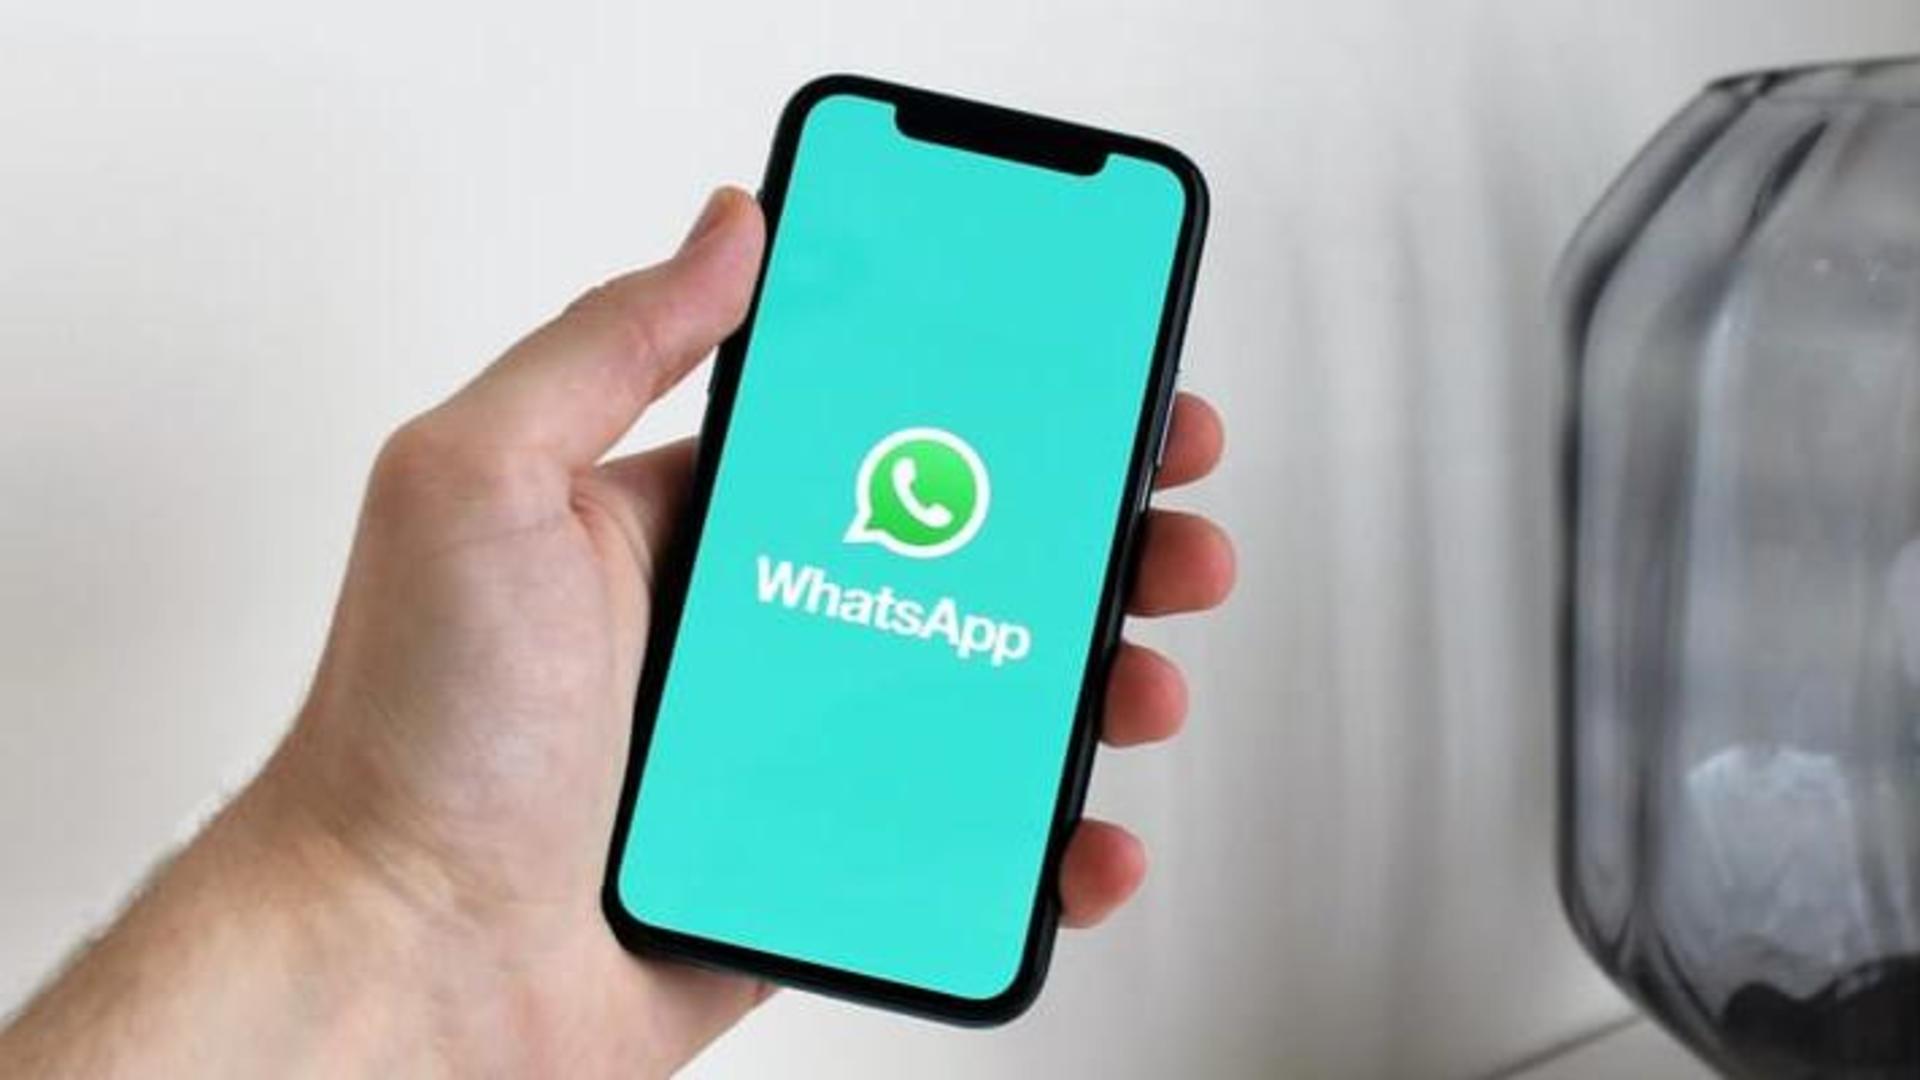 Soon, WhatsApp will automatically silence unknown callers: Here's how